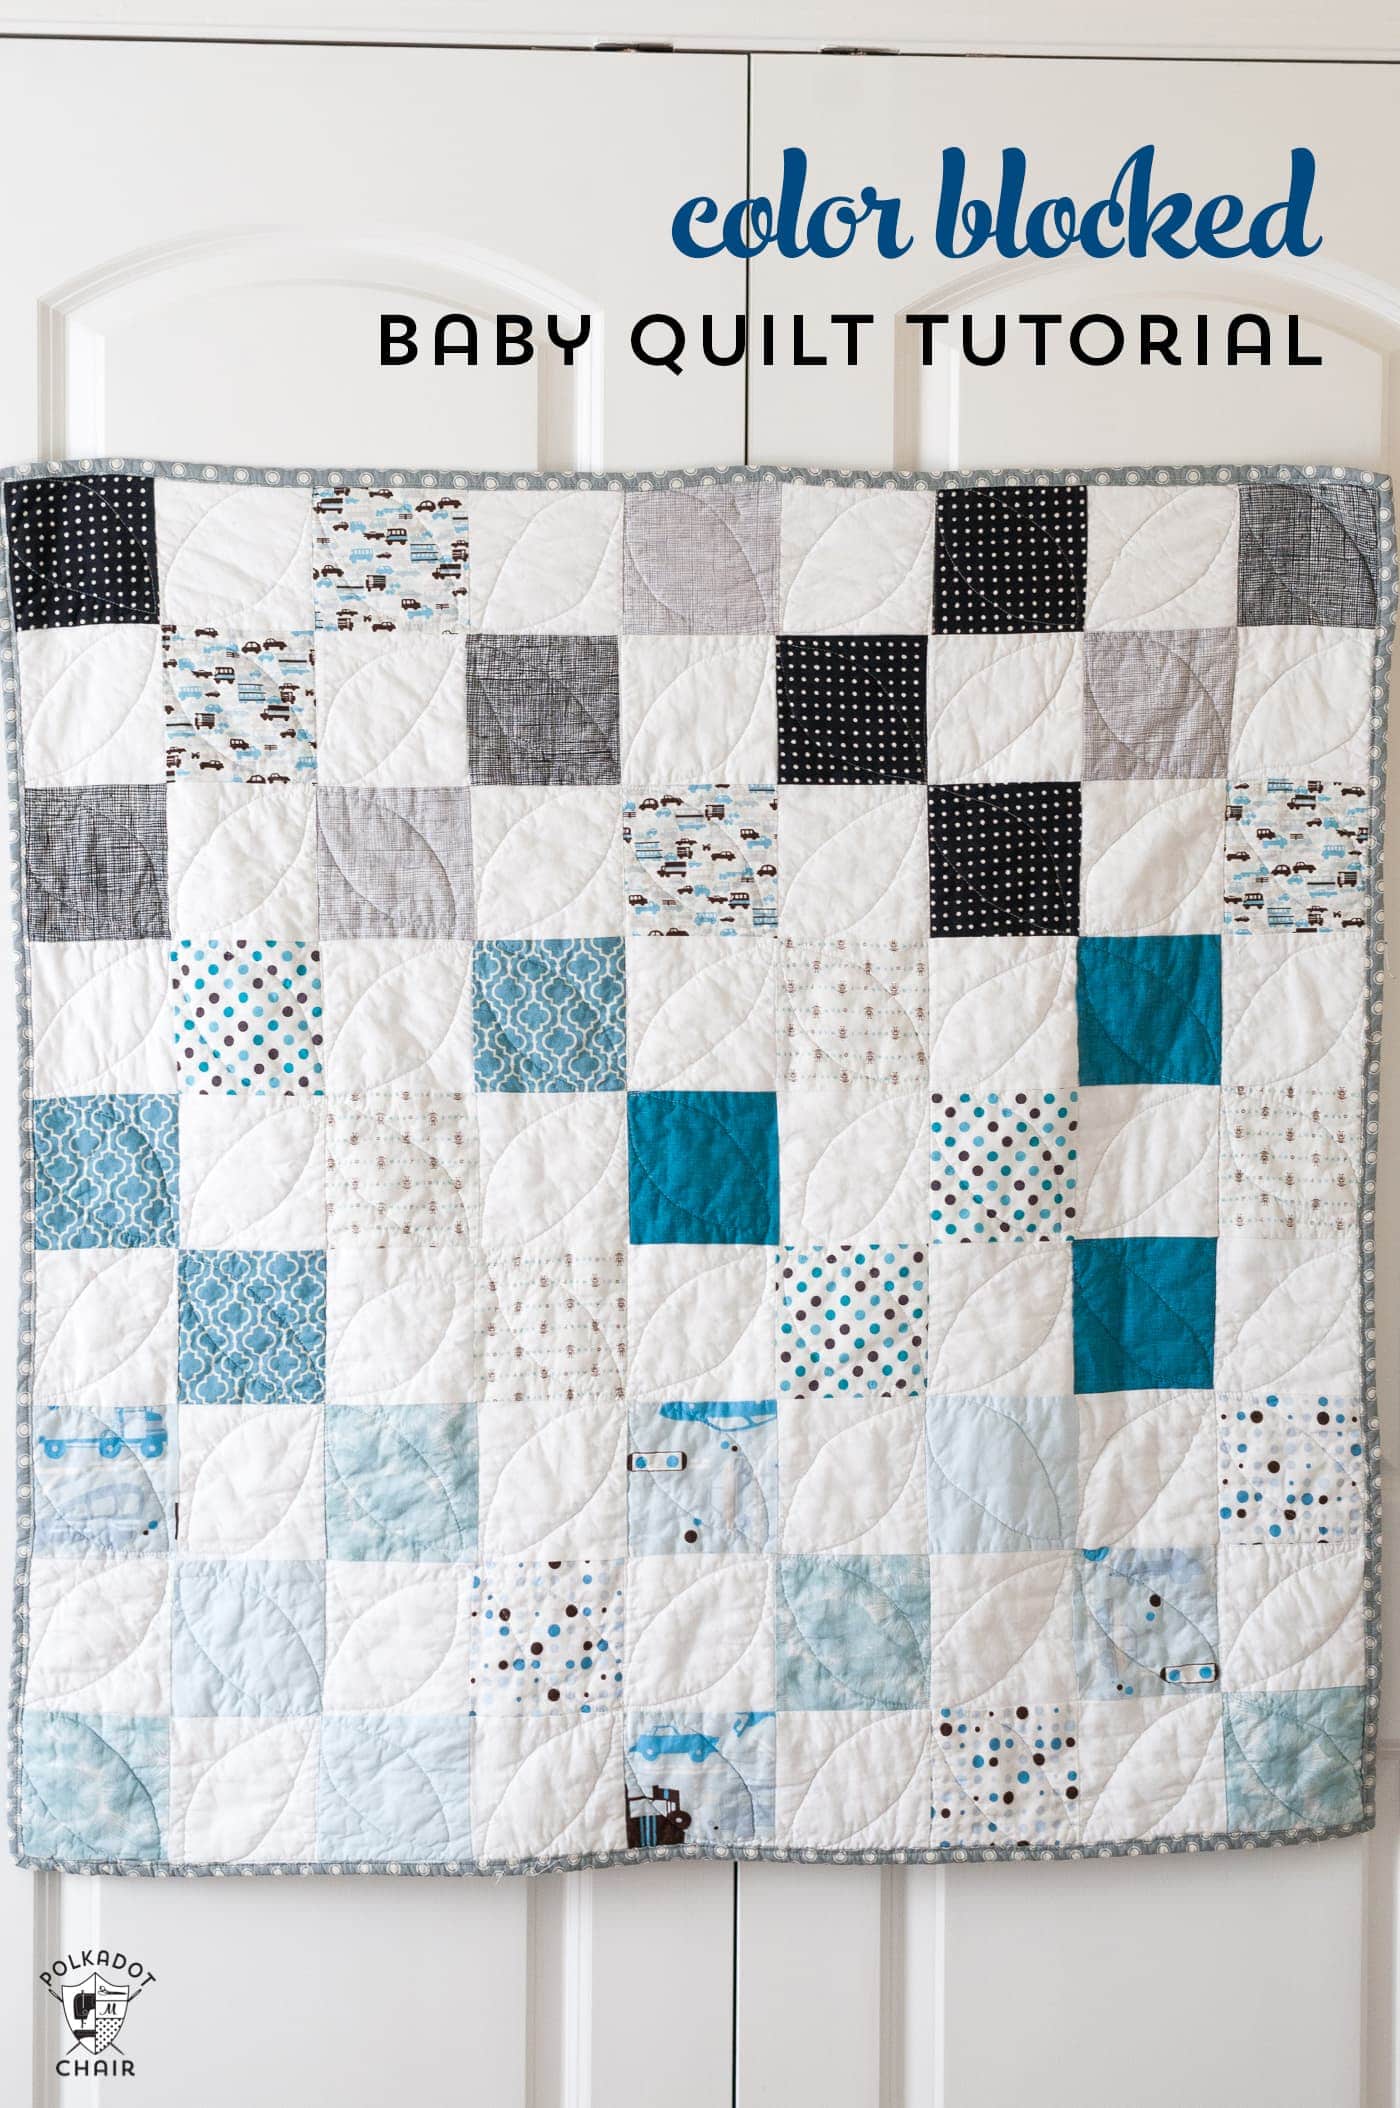 new baby quilt patterns